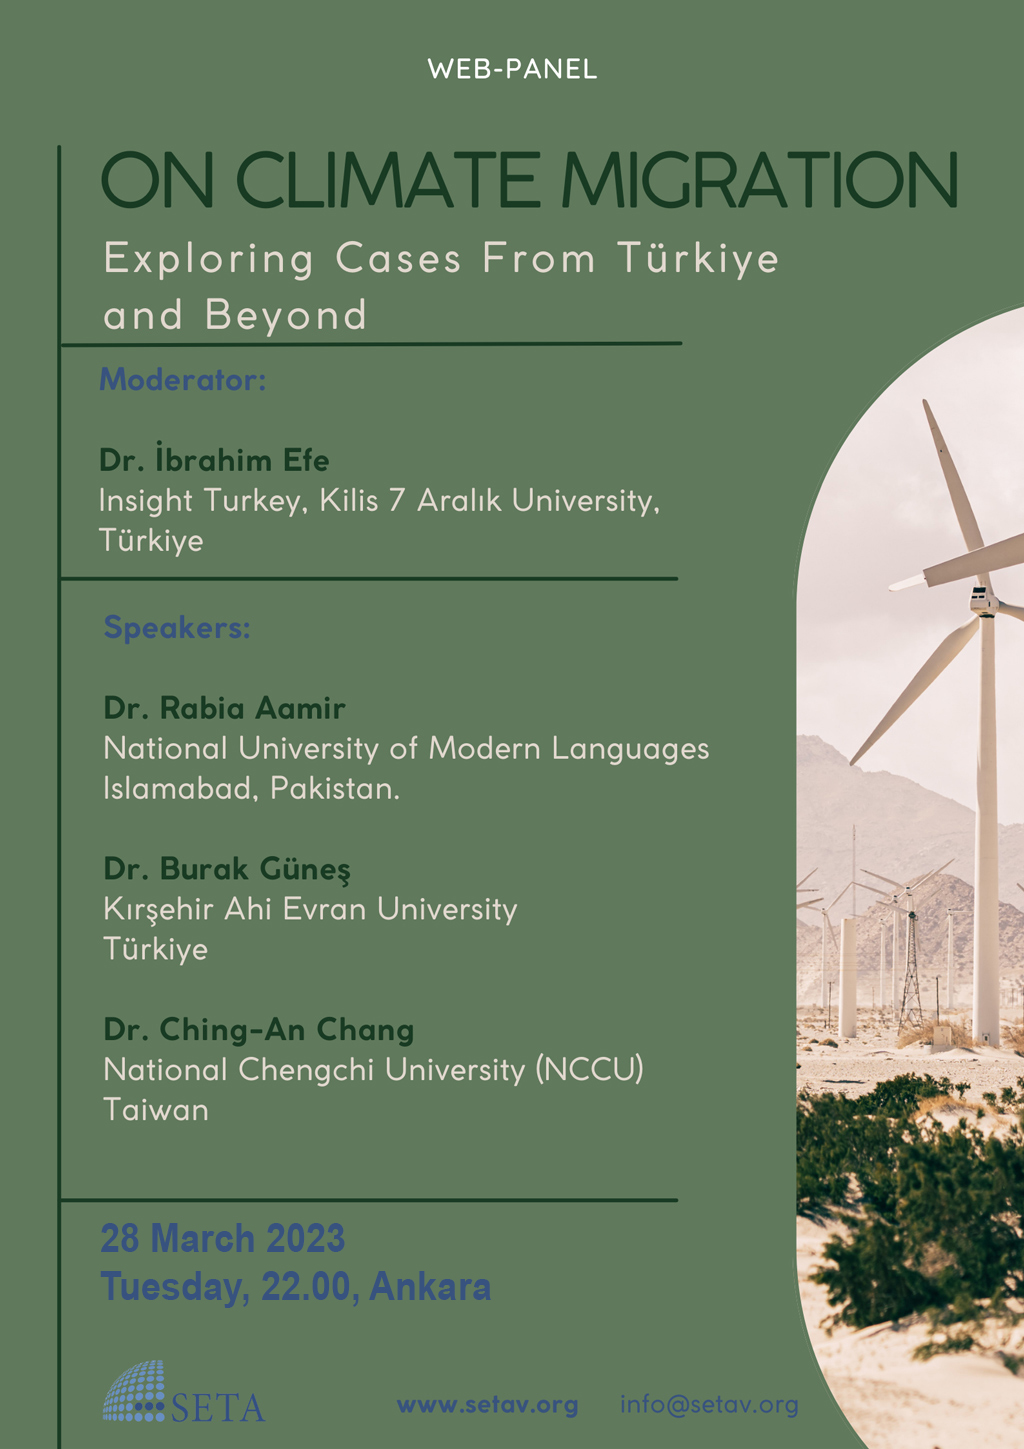 Web Panel: On Climate Migration Exploring Cases from Türkiye and Beyond